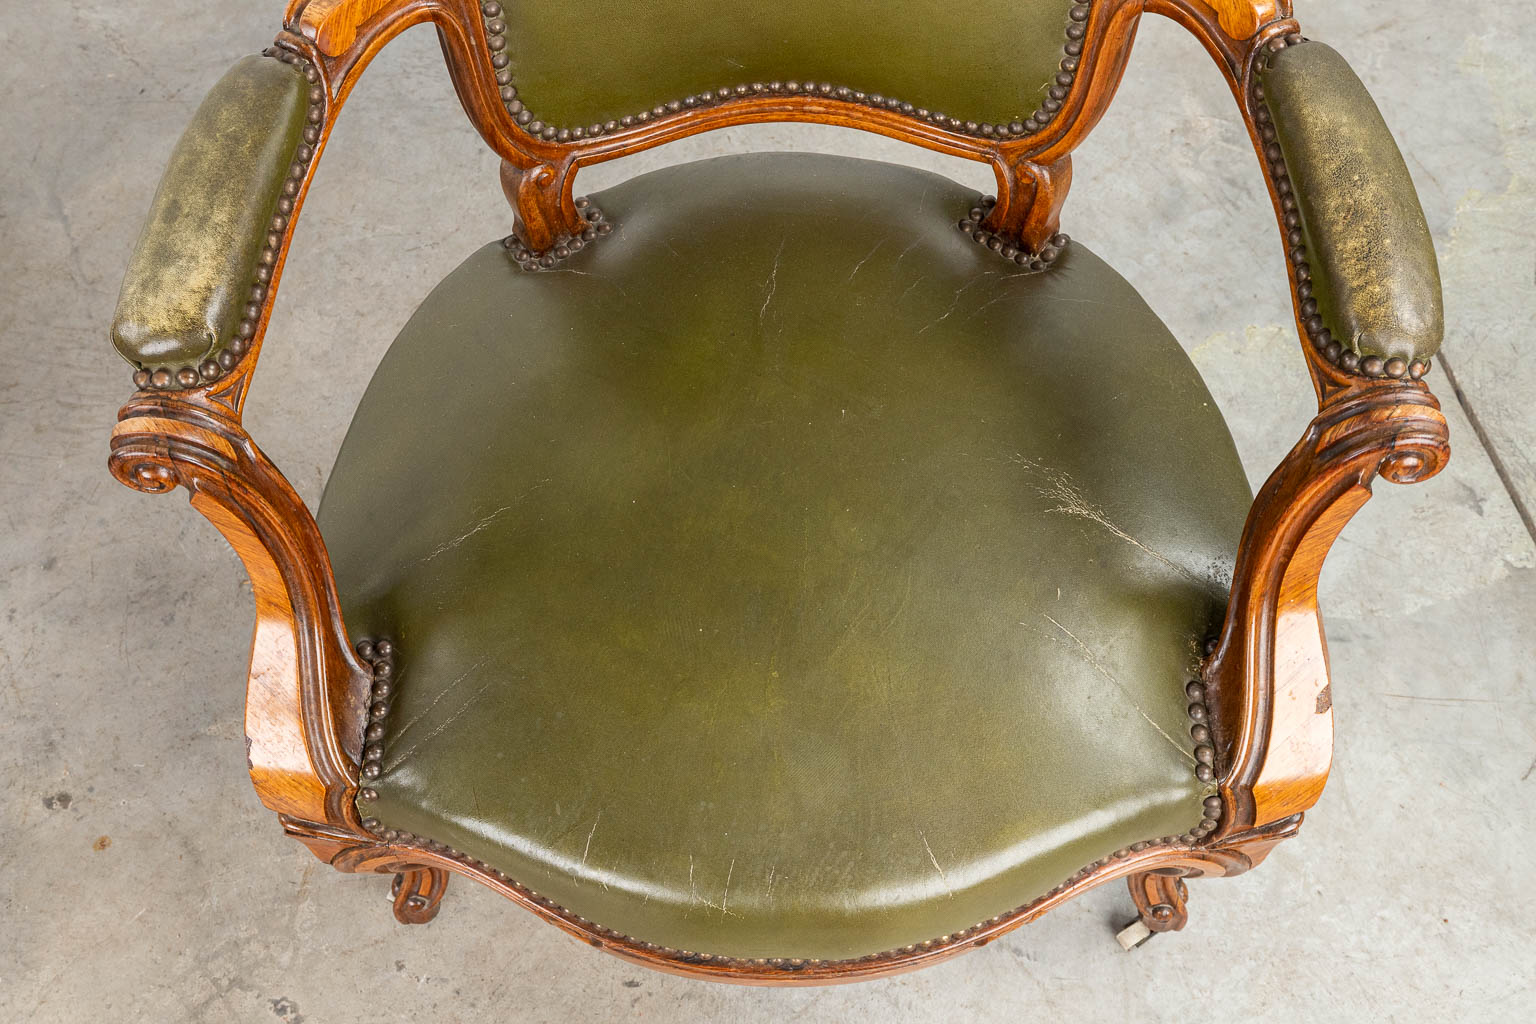 A pair of armchairs made of sculptured wood in Louis Philippe style. (H:101cm)